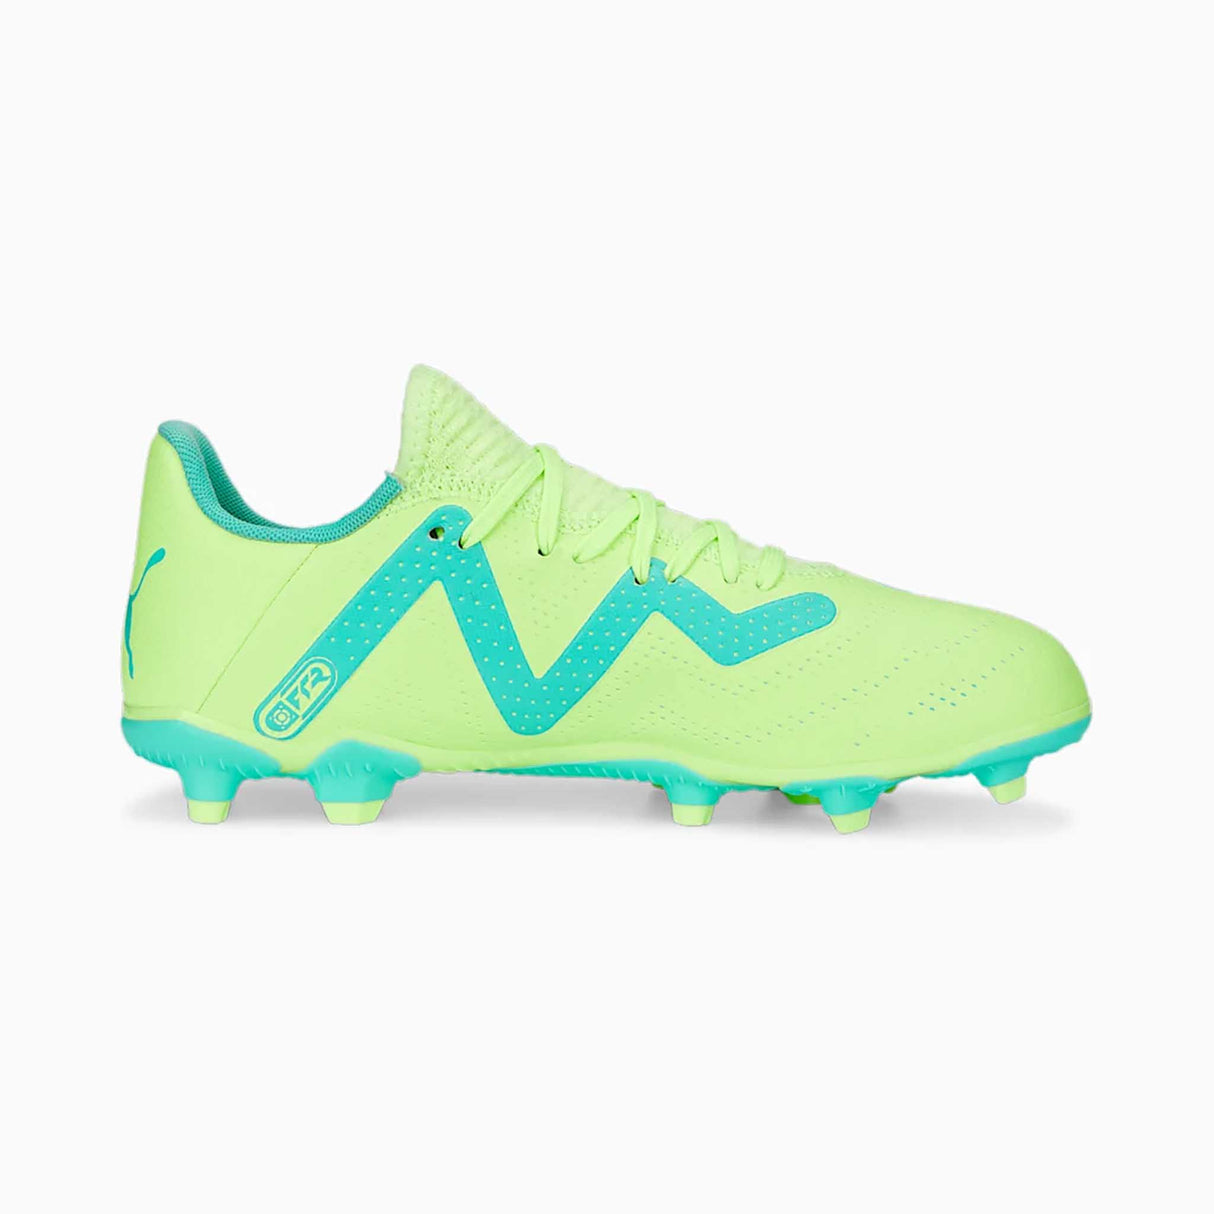 Puma Future Play FG/AG souliers soccer enfant lateral- yellow / black / electric peppermint